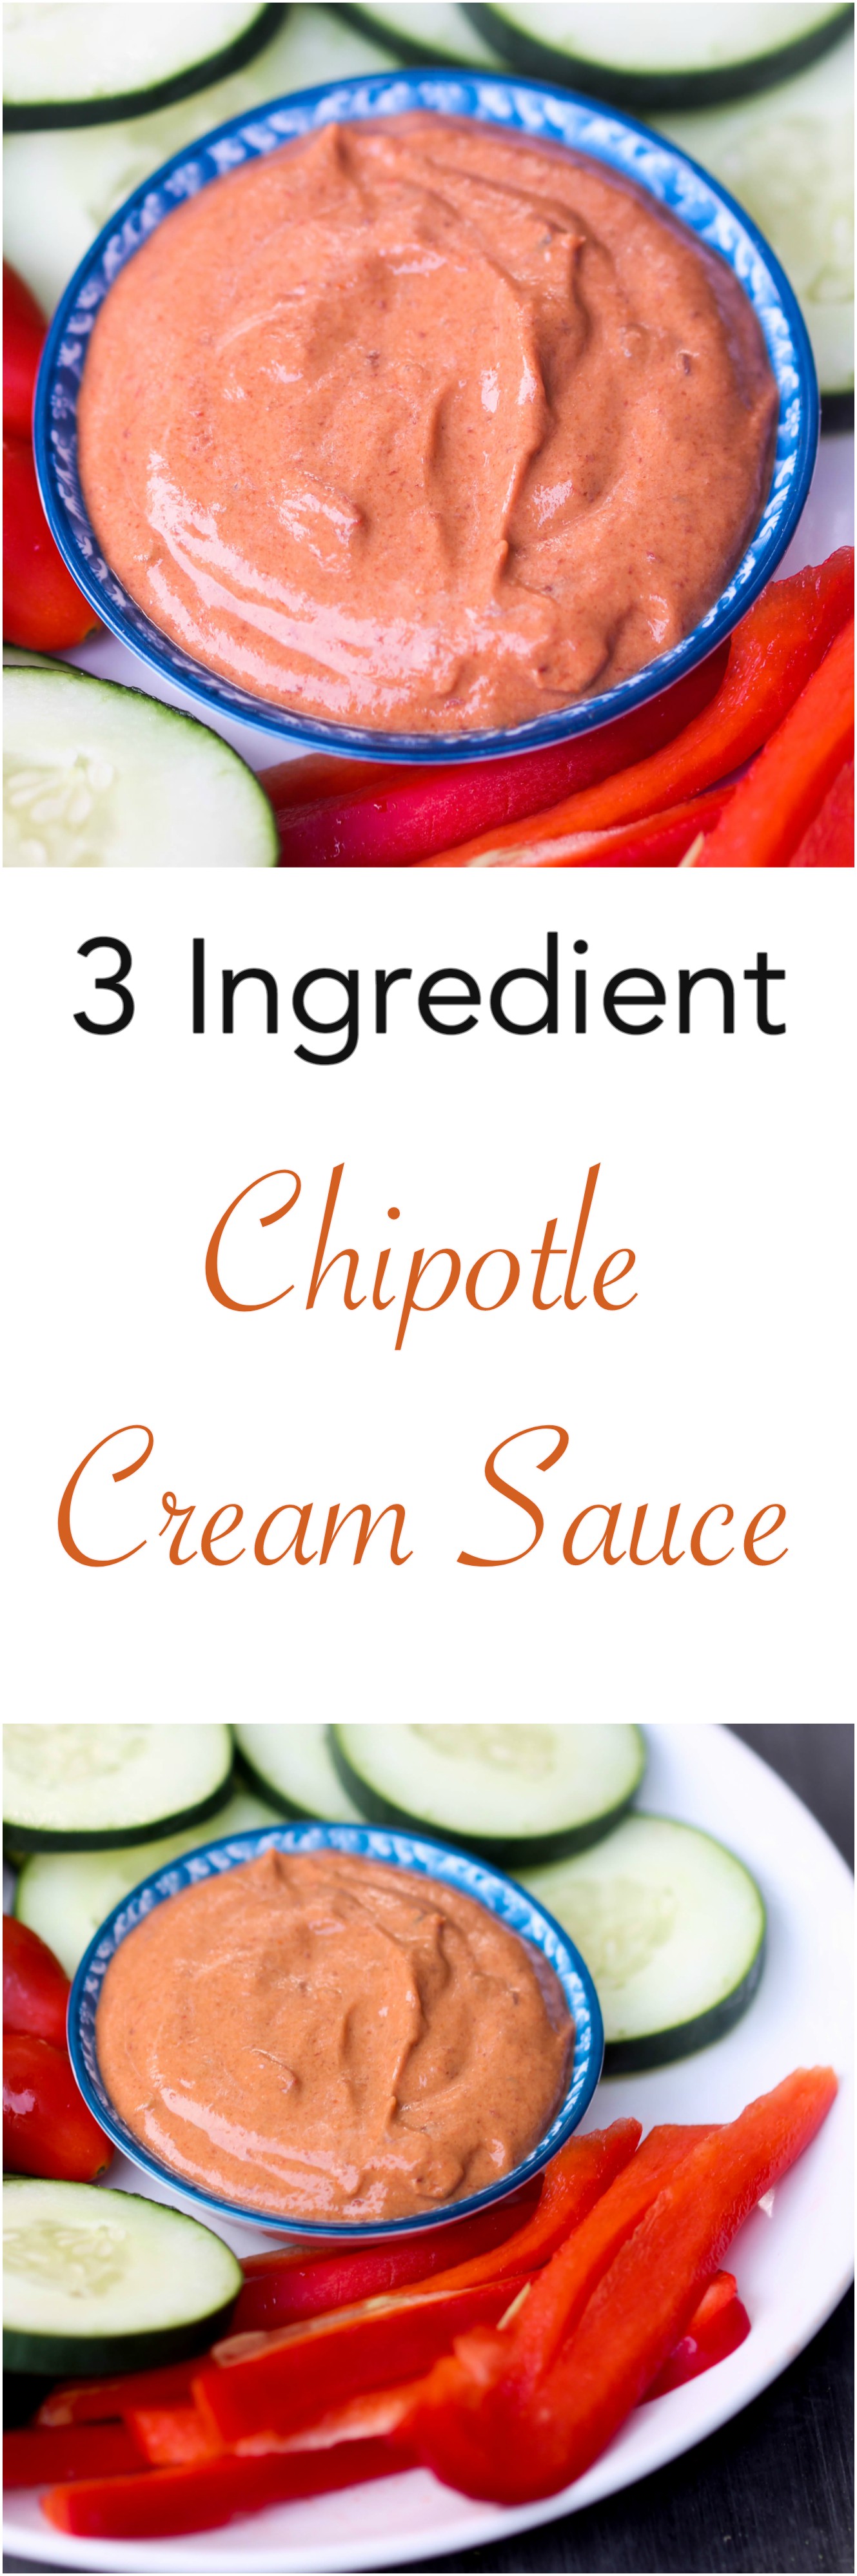 3 Ingredient Chipotle Cream Sauce is a spicy, creamy sauce that can be used as salad dressing, pasta sauce, or as a dip.